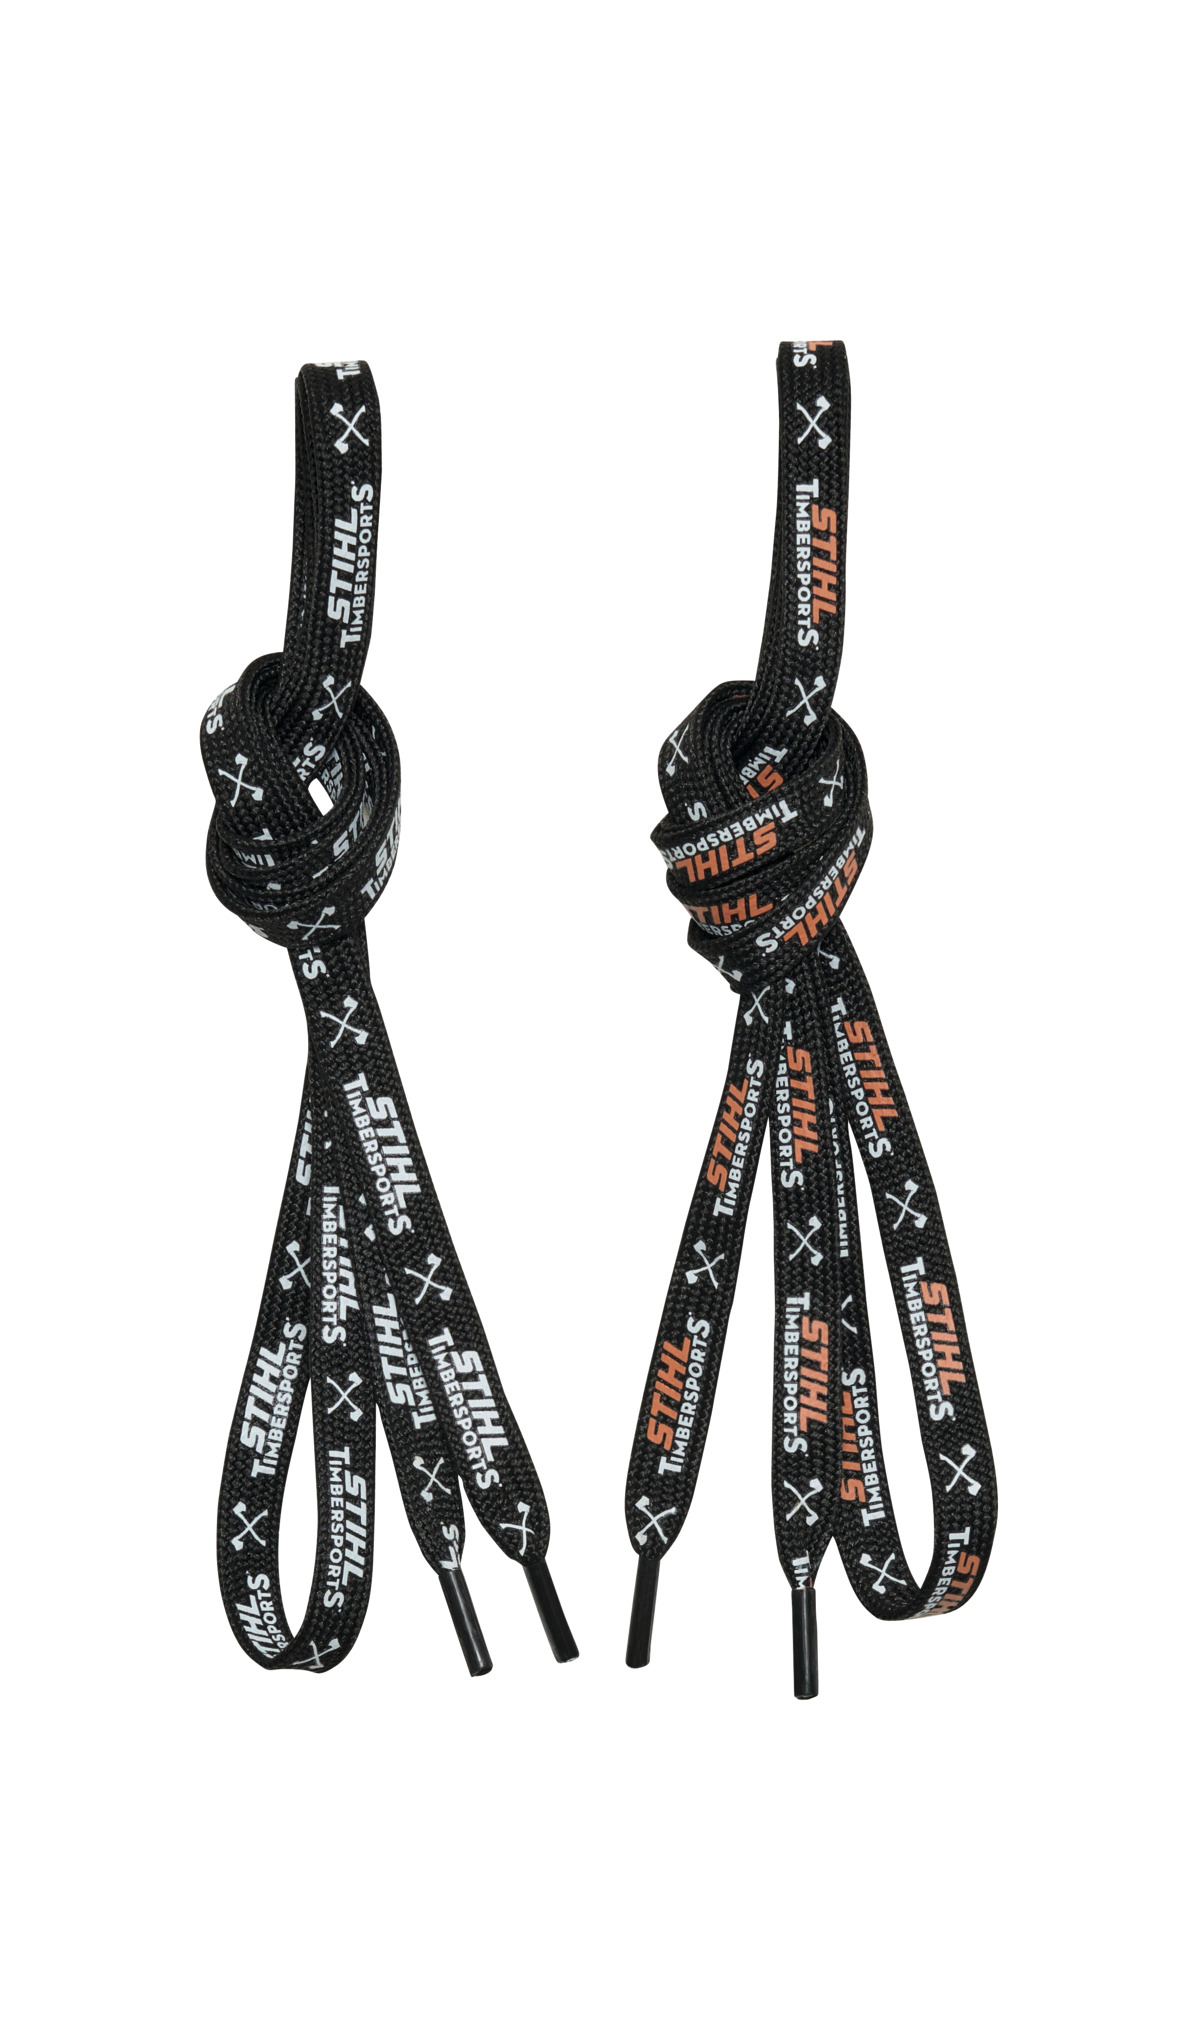 Lacets TIMBERSPORTS®, set de 2